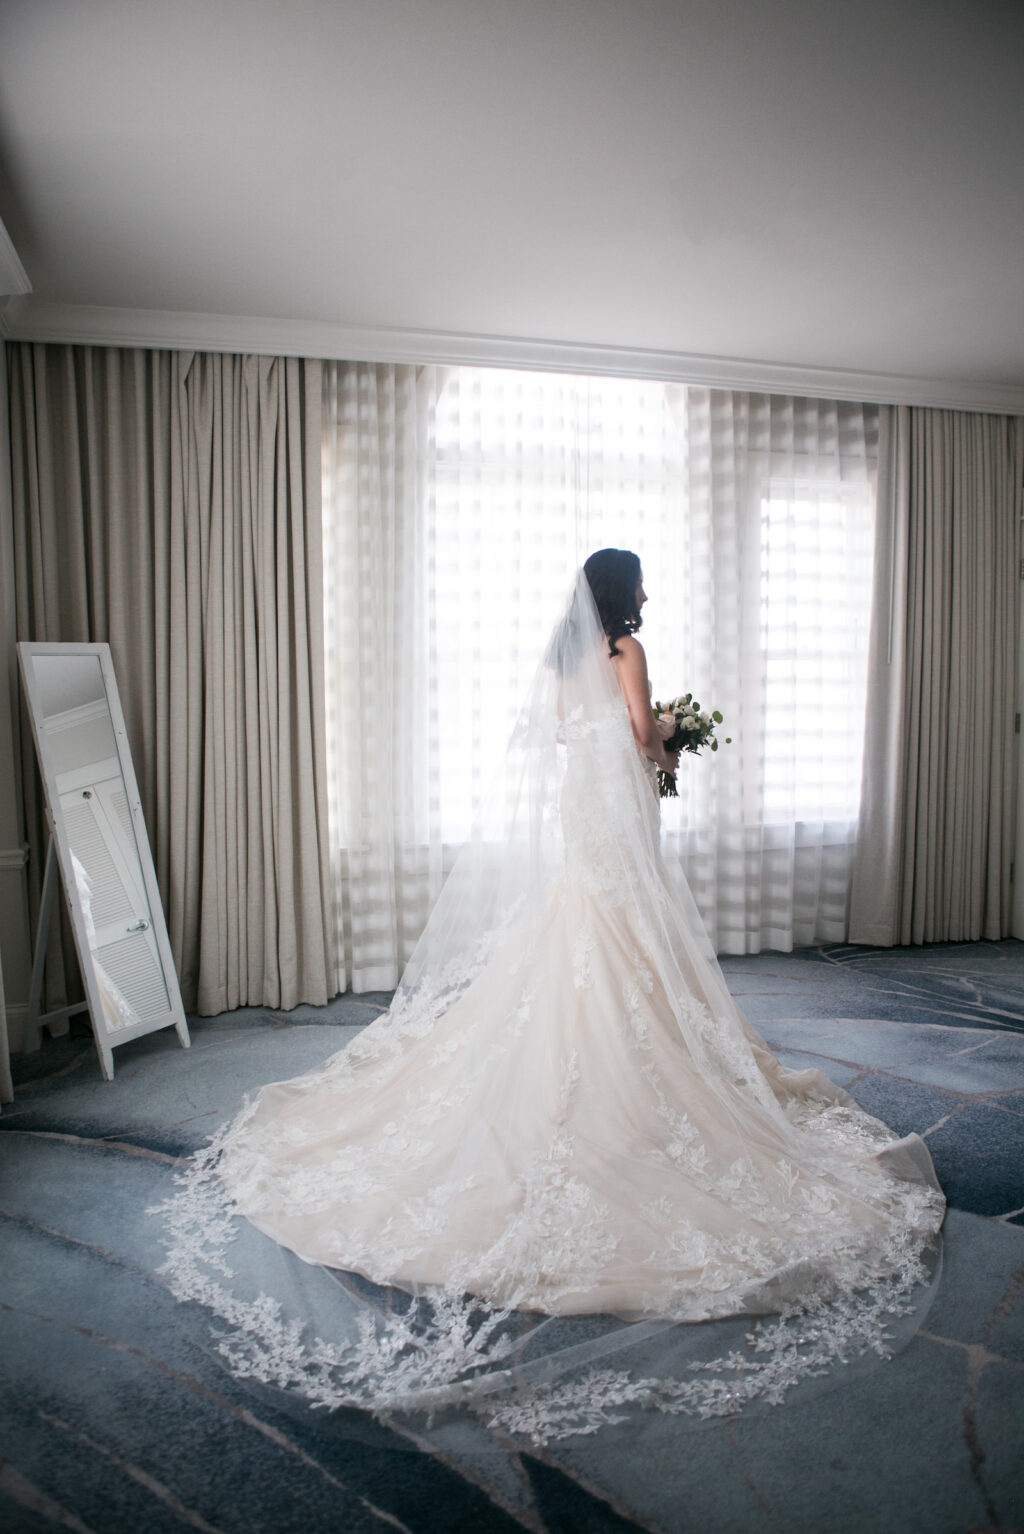 Bride in Fit and Flare Wedding Dress with Lace Detail and Long Train Veil | Winnie Couture | St. Pete Wedding Photographer Carrie Wildes Photography